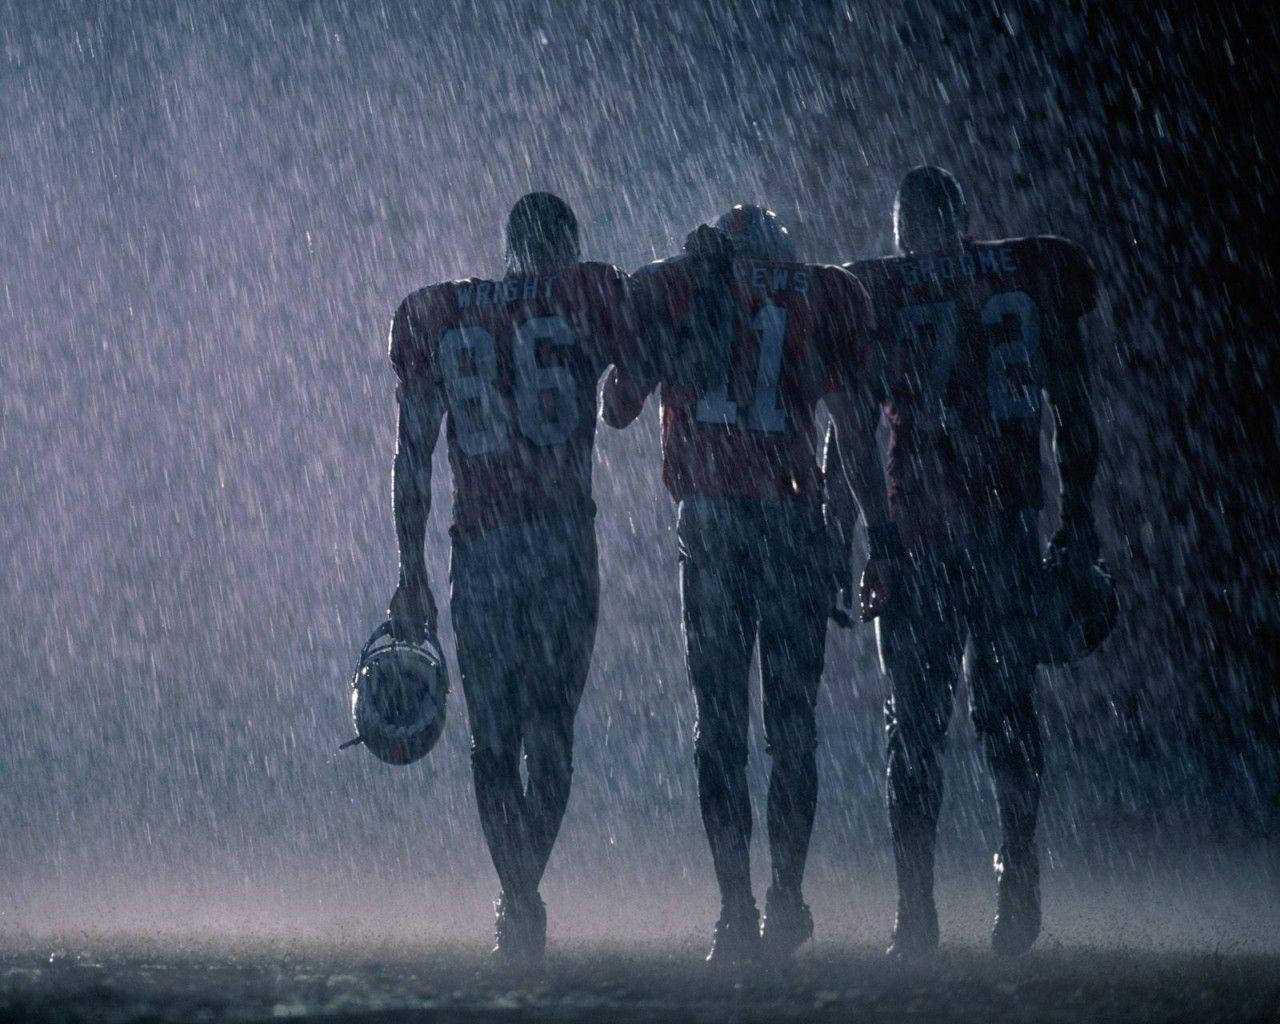 Nfl Football Players In The Rain Background